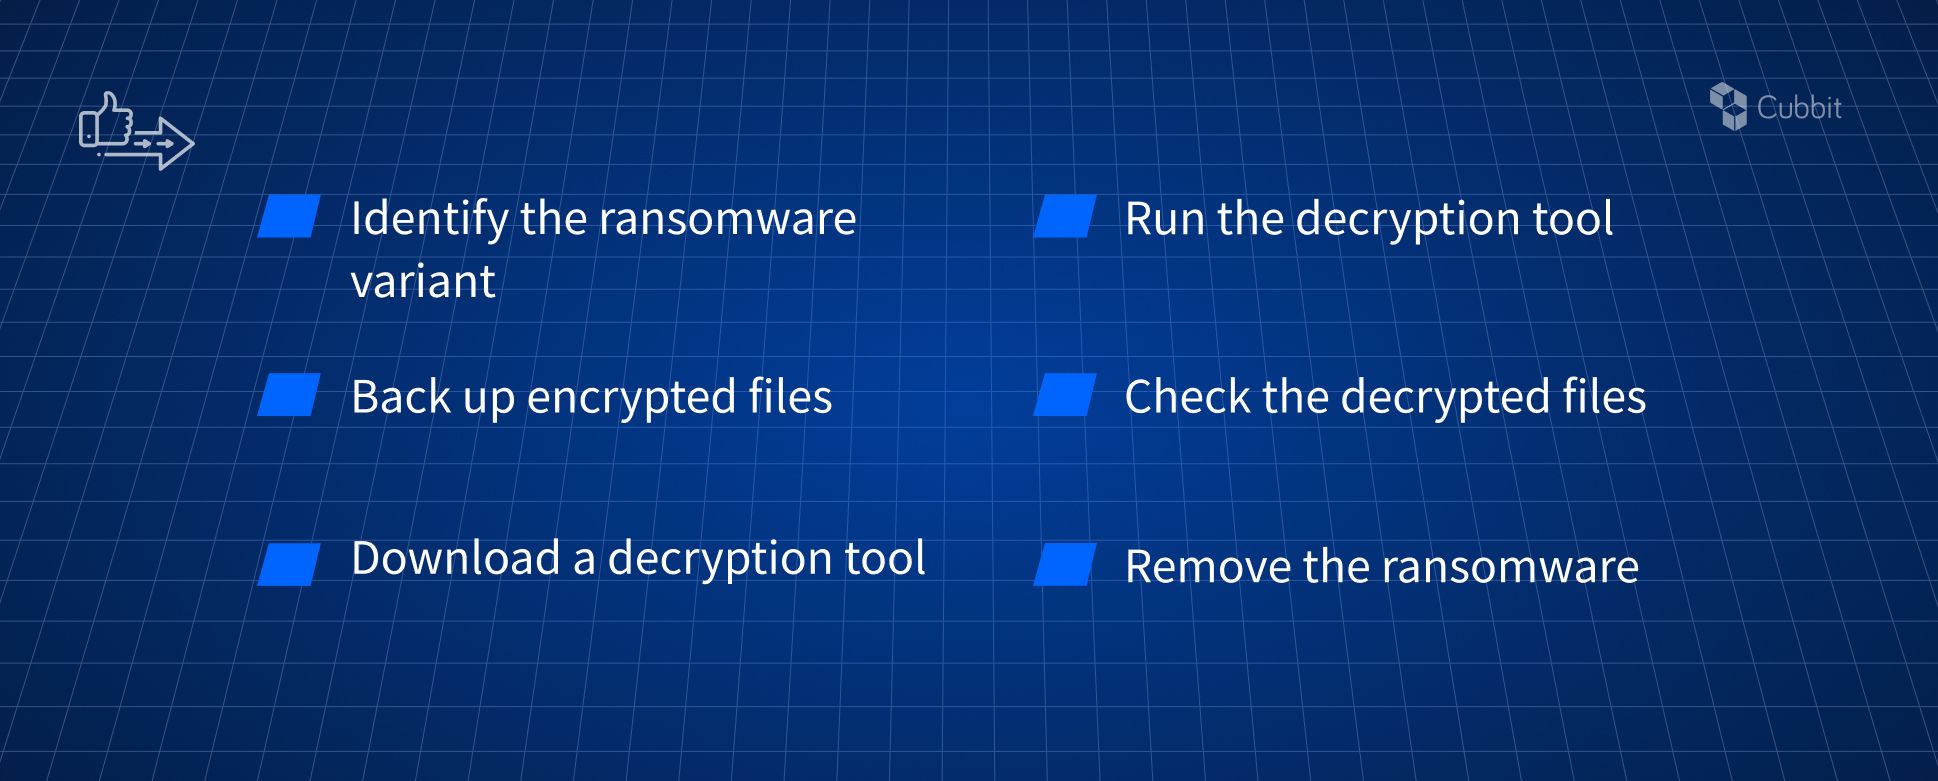 checklist on how to decrypt files encrypted by ransomware